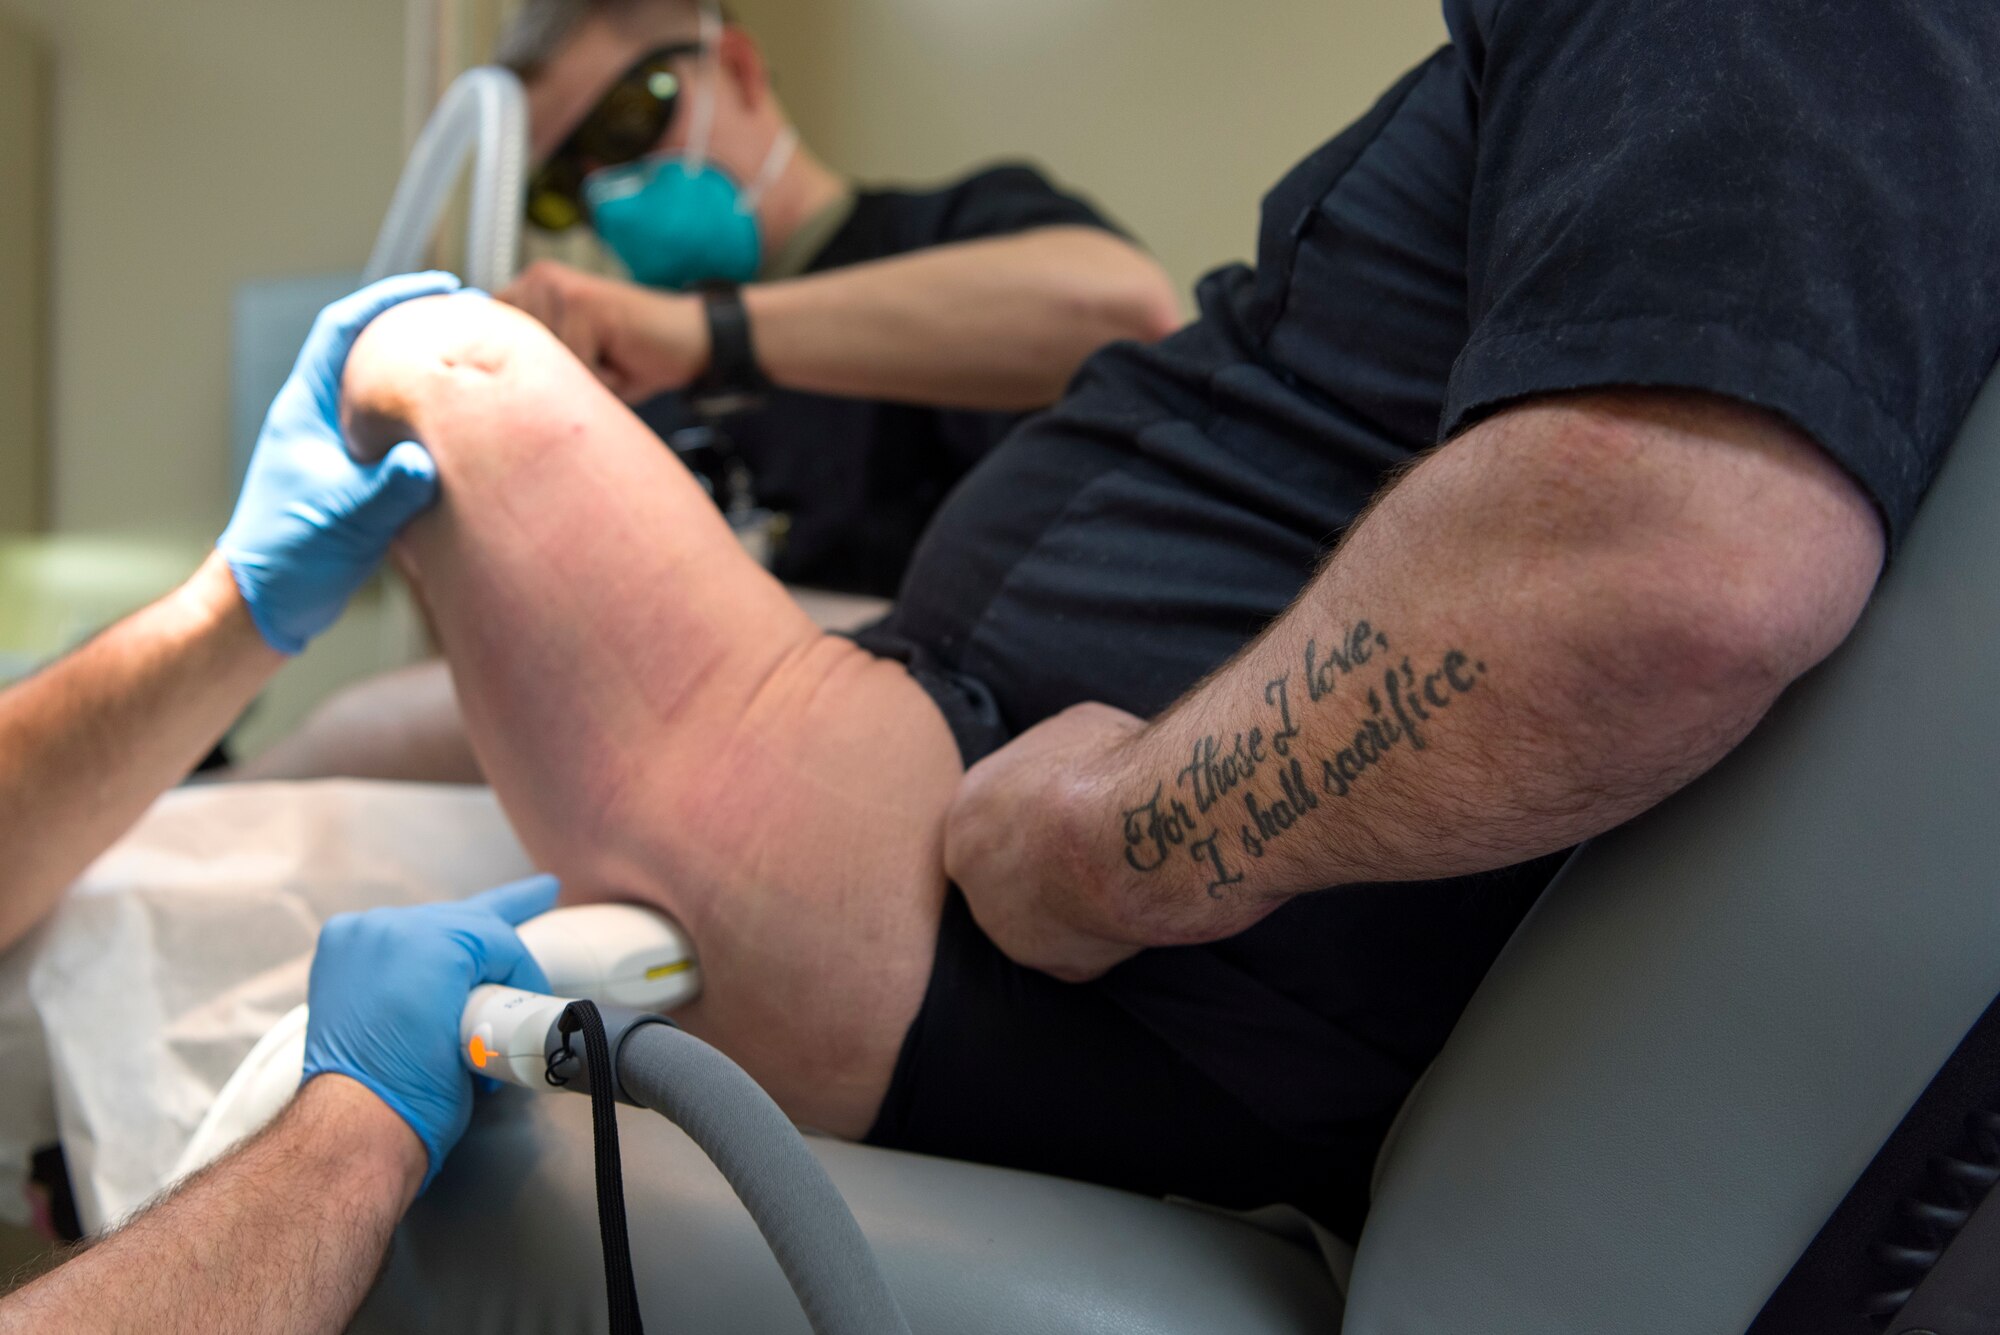 A wounded warrior receives laser treatment to improve the scar tissue of his amputated leg at the MacDill Air Force Base, Fla., scar clinic Feb. 15, 2019. The wounded-warrior-focused clinic offers a variety of treatments for those who suffer from scarring as a result of blast injuries, burns, amputations, and other surgeries.